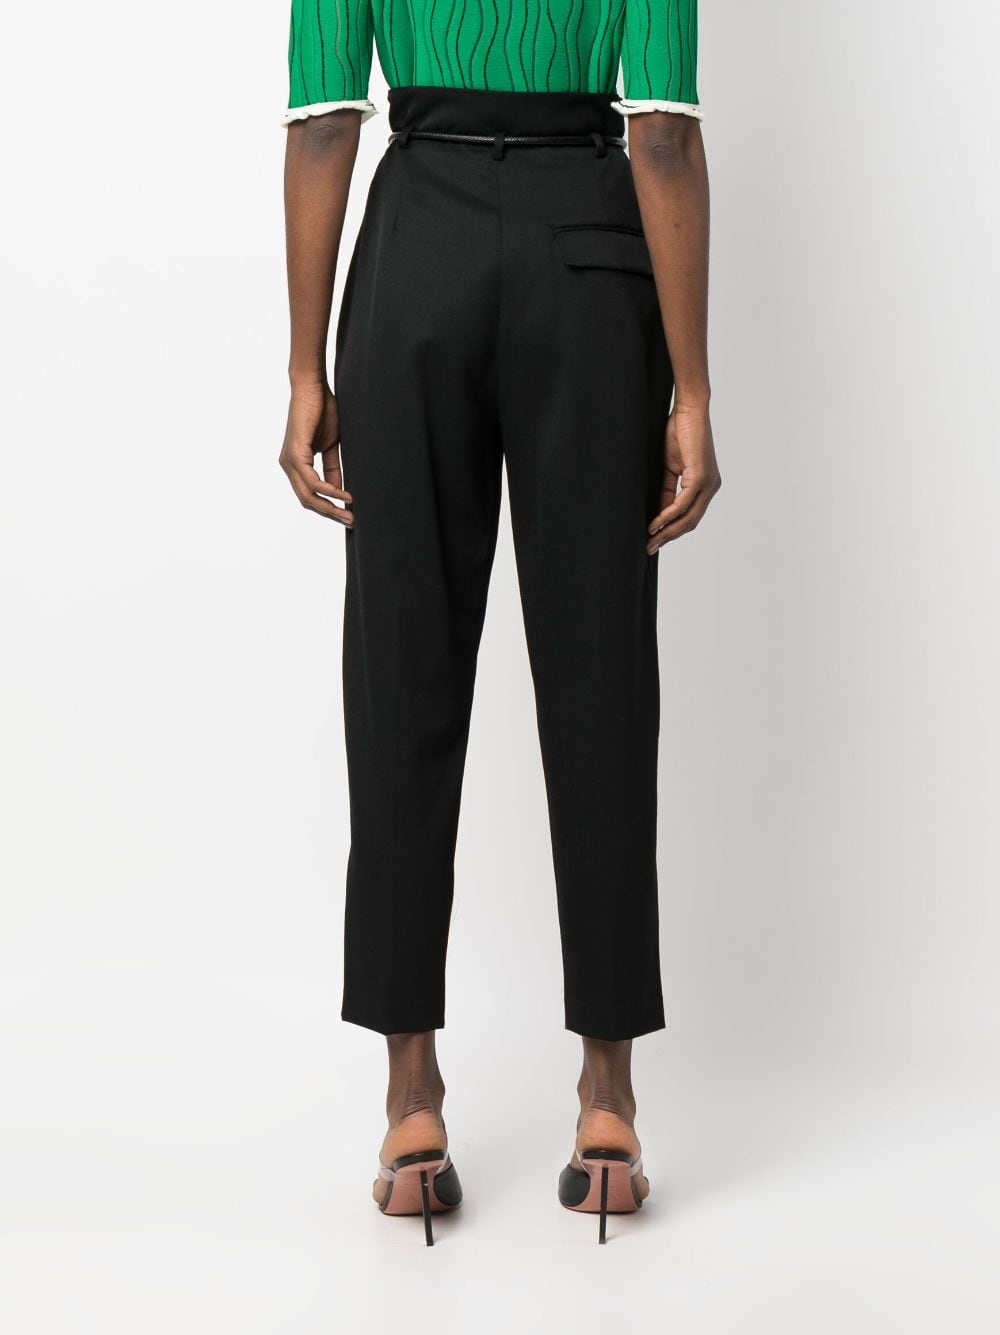 belted-waist cropped trousers - 4